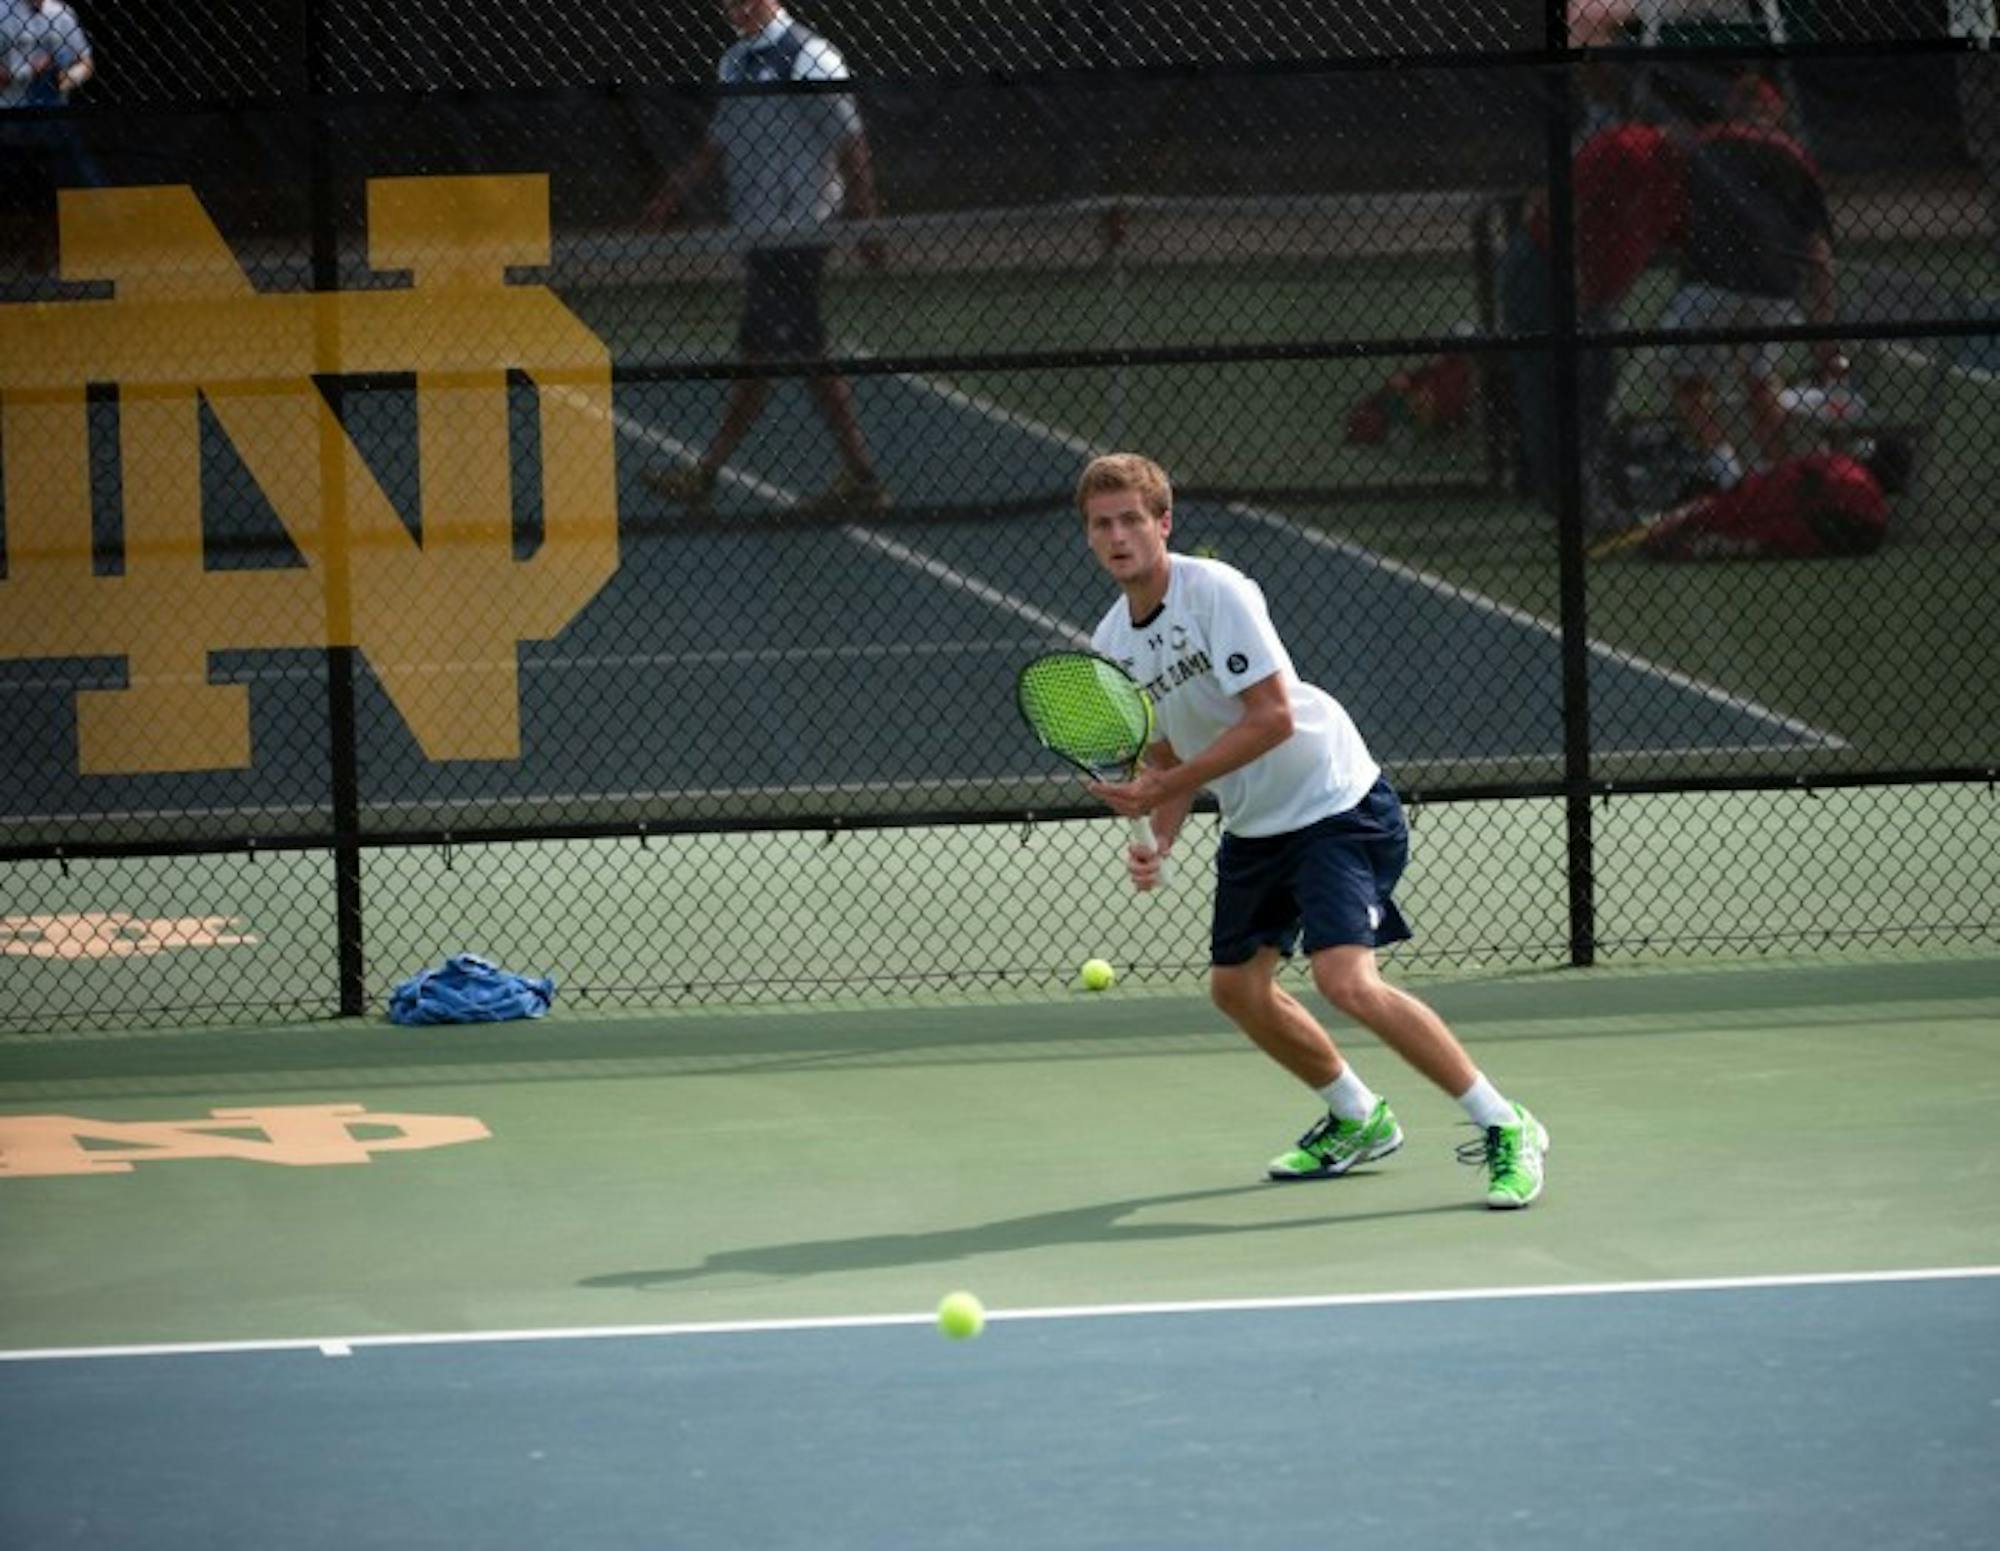 Irish senior Quentin Monaghan returns a shot during a 4-3 win over North Carolina State on April 18 at Courtney Tennis Center.